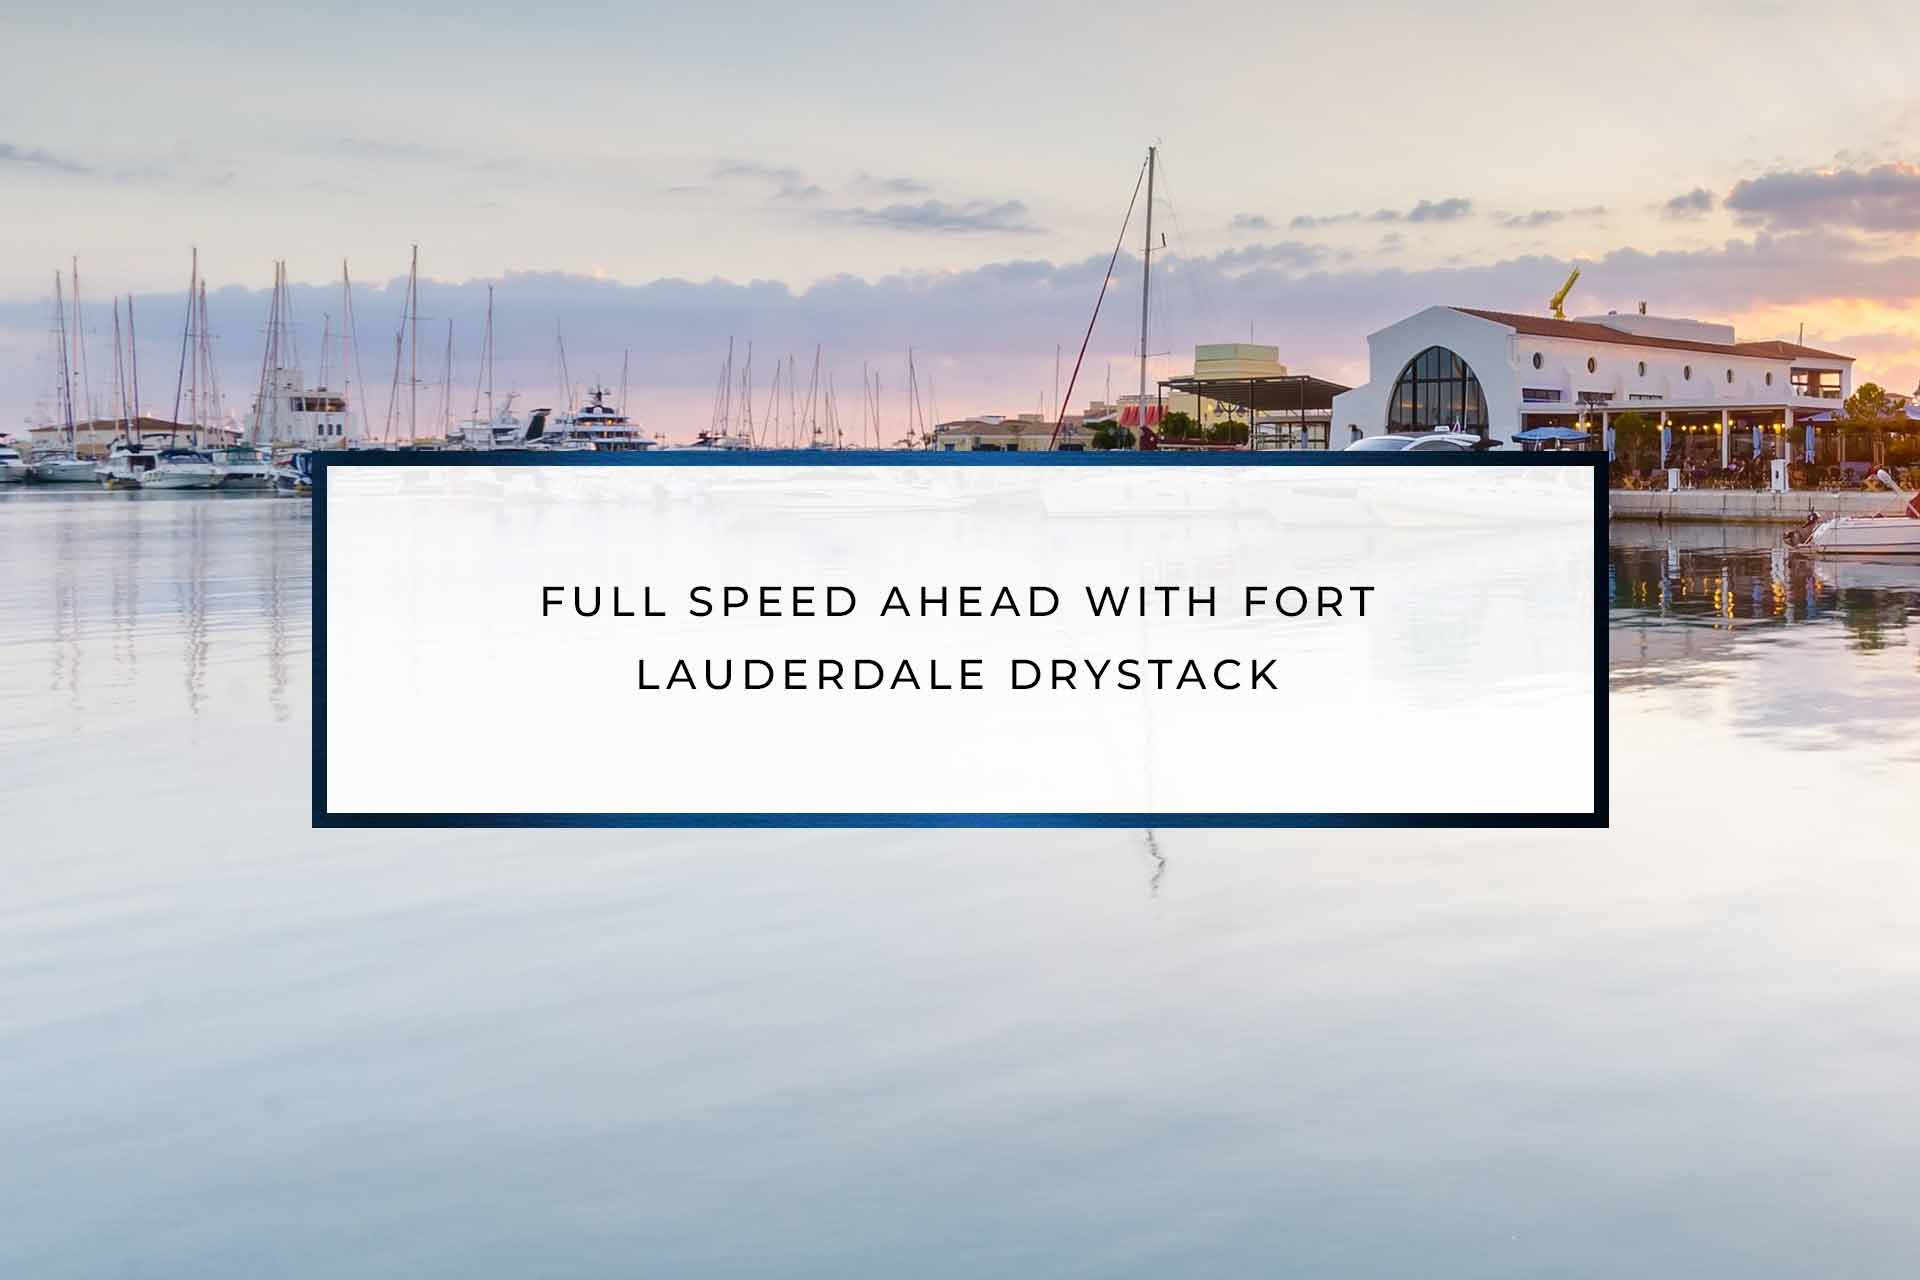 Full Speed Ahead With Fort Lauderdale Drystack